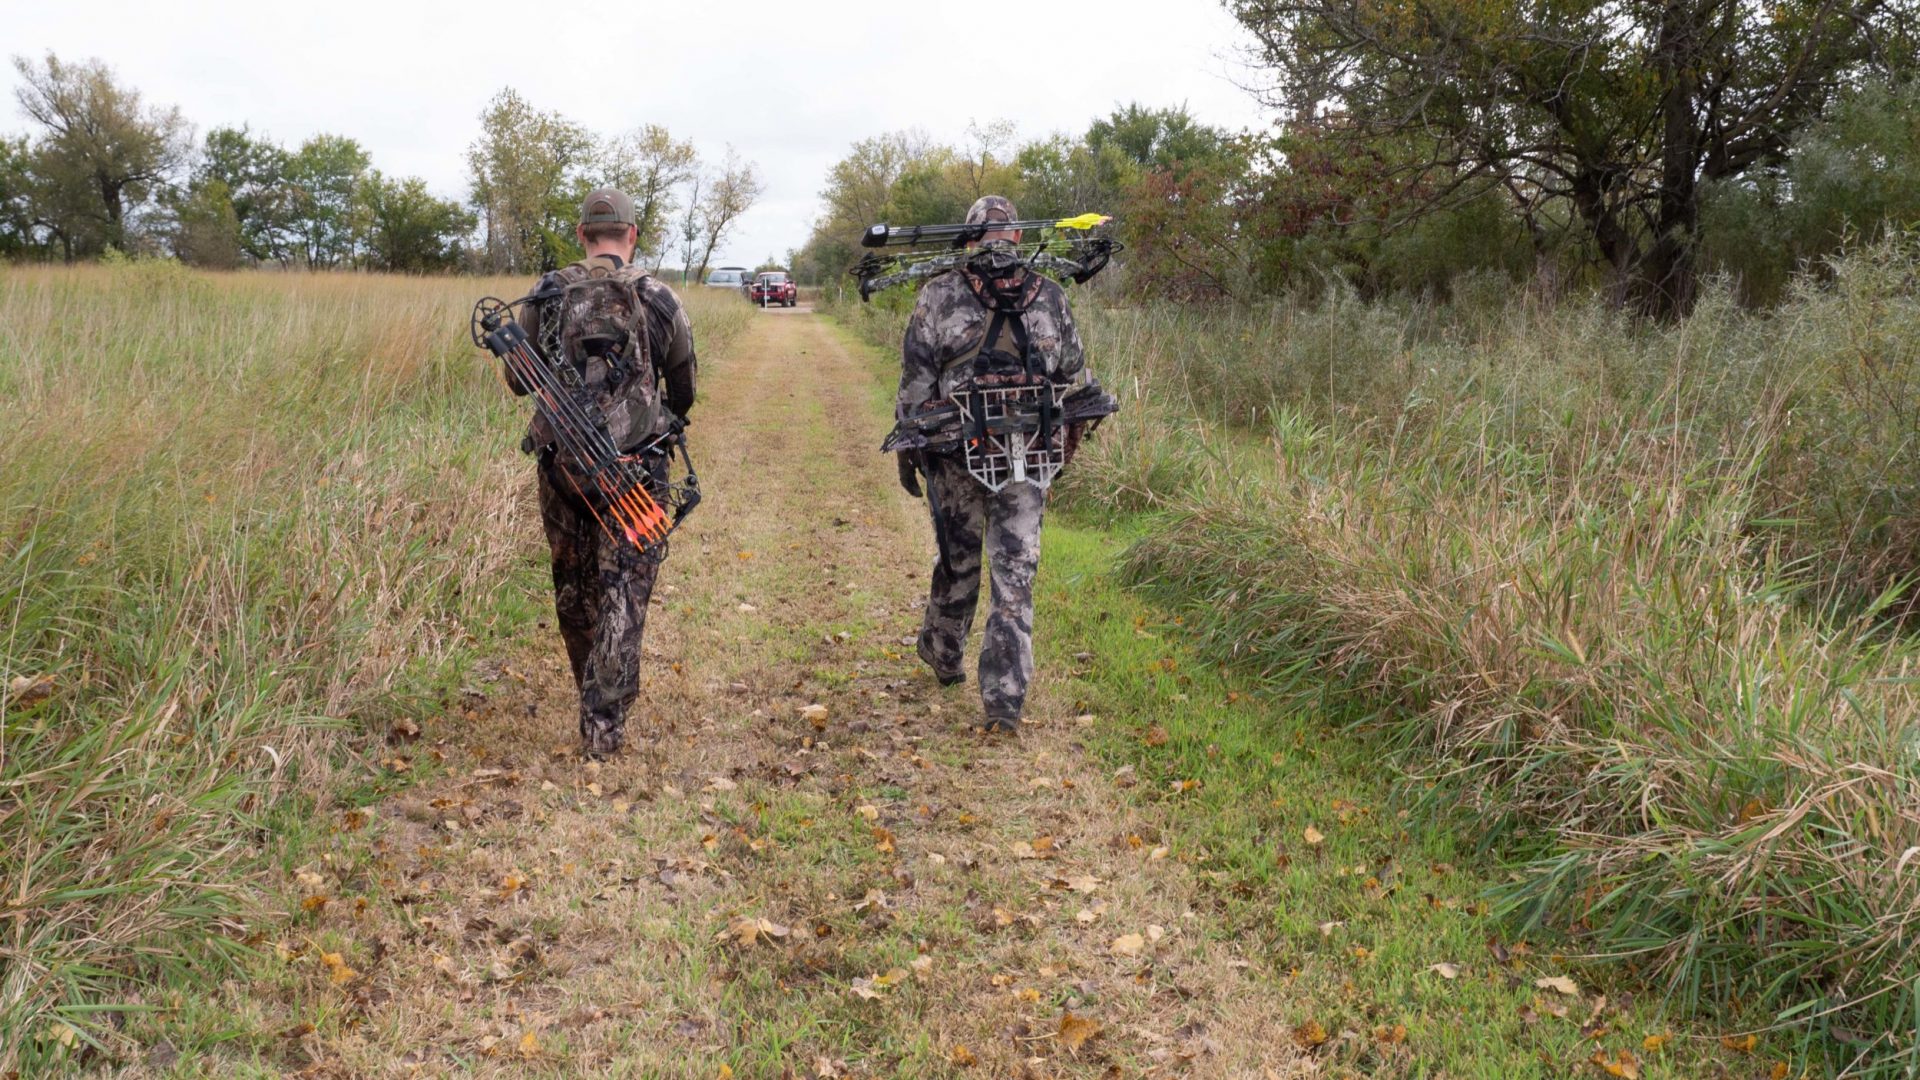 Pre Rut Hunting Tactics For October Whitetails